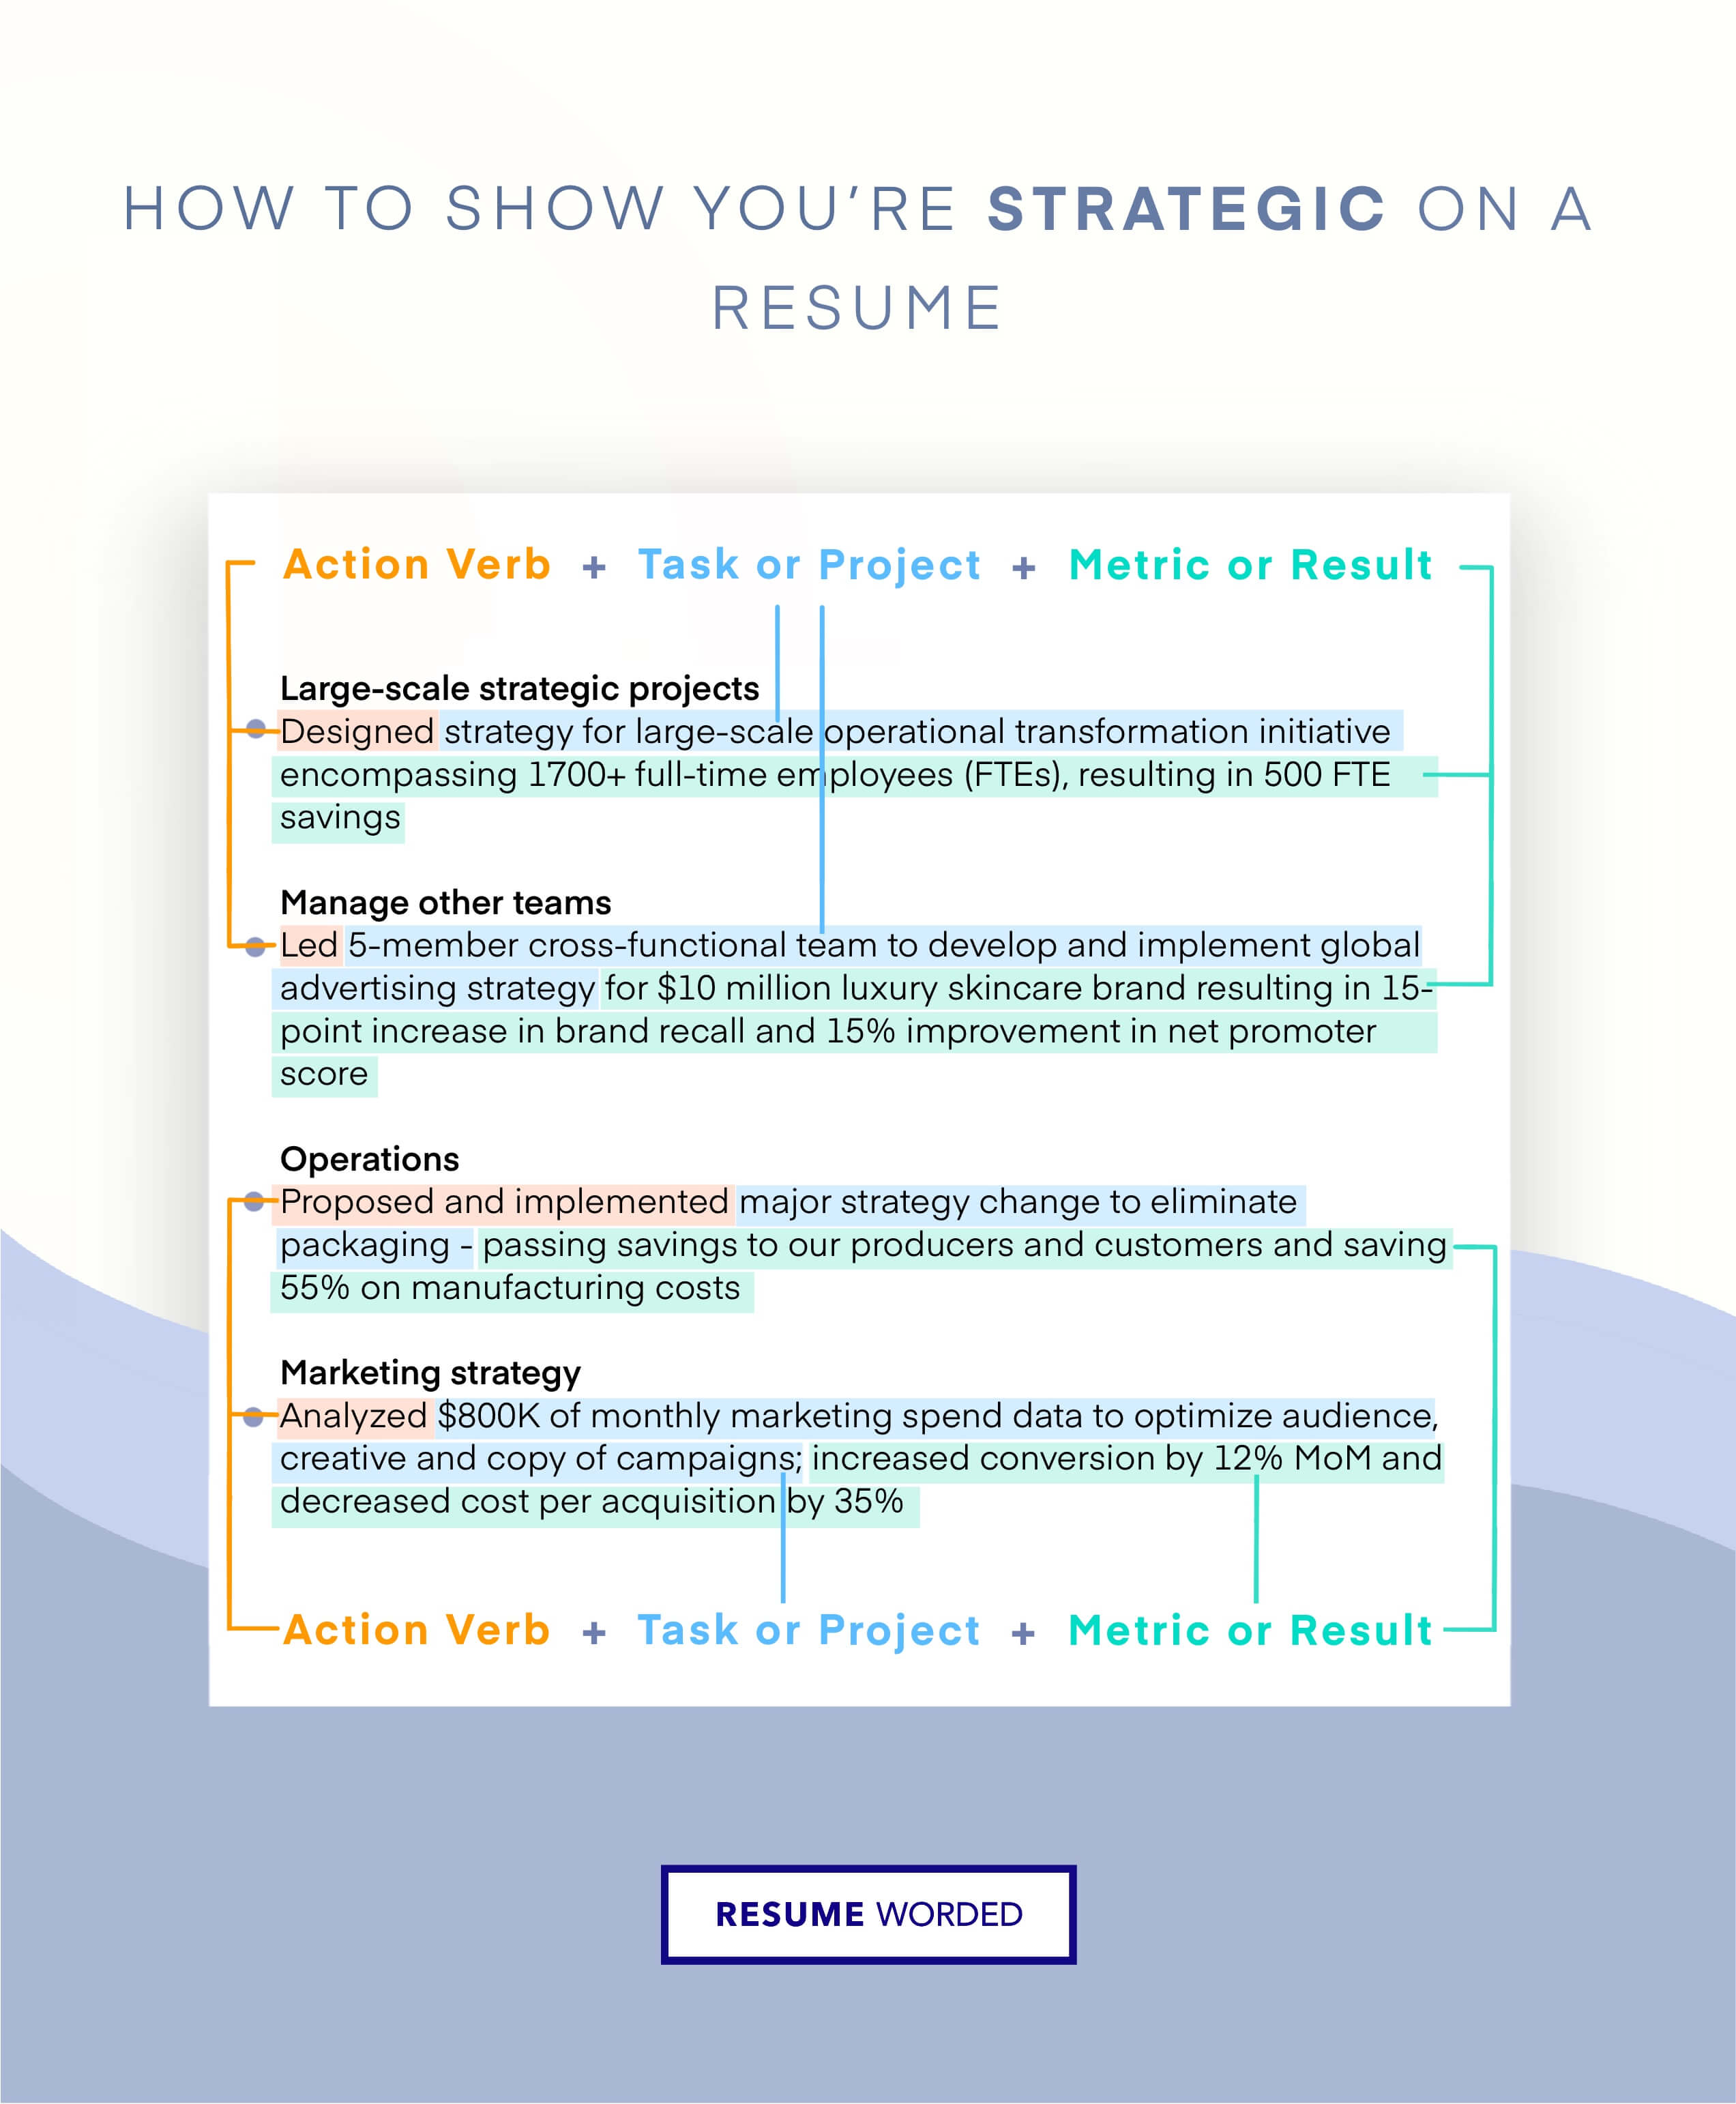 Emphasize your ability to strategize - Retail Brand Manager CV